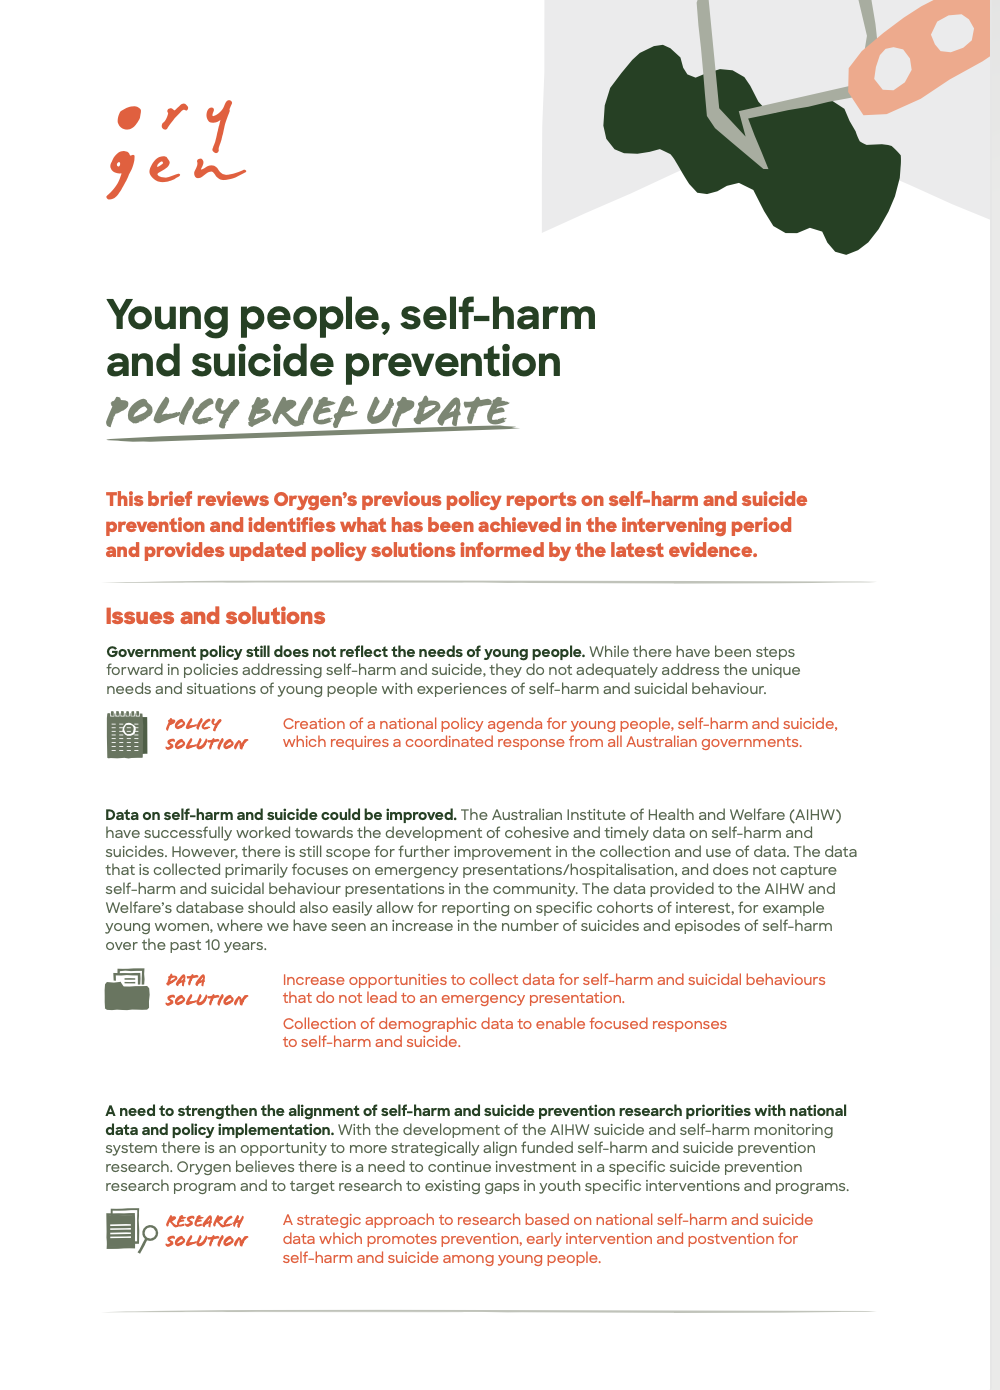 Young people, self-harm and suicide prevention policy brief update